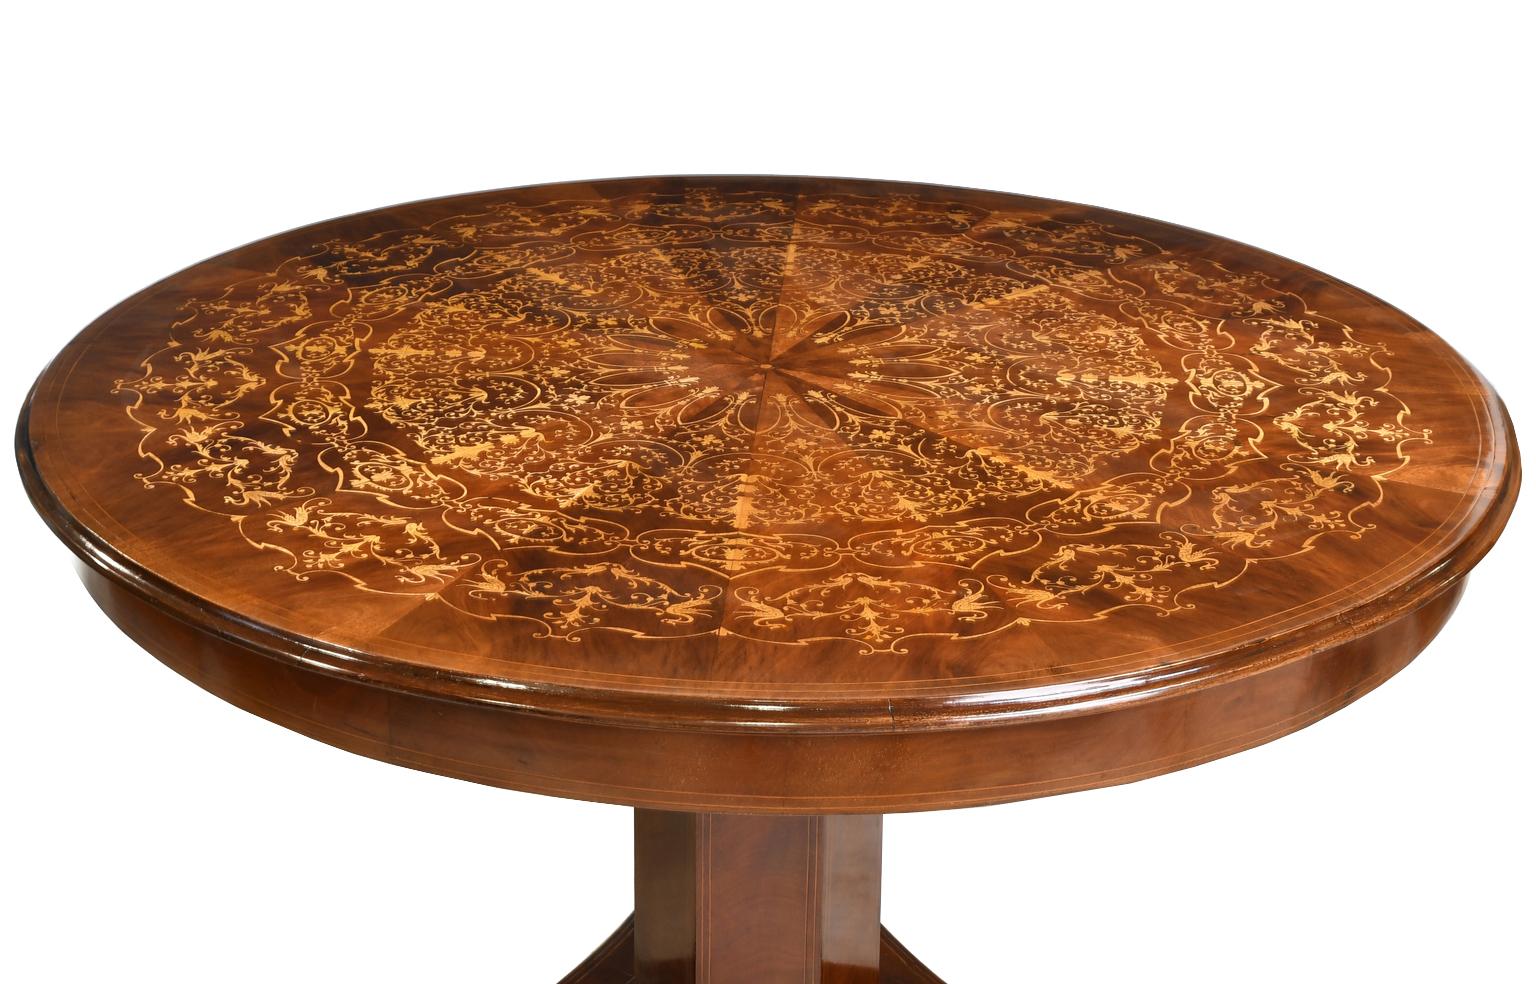 Polished Round Tilt-Top English Regency Pedestal Loo/Center Table in Mahogany w Marquetry